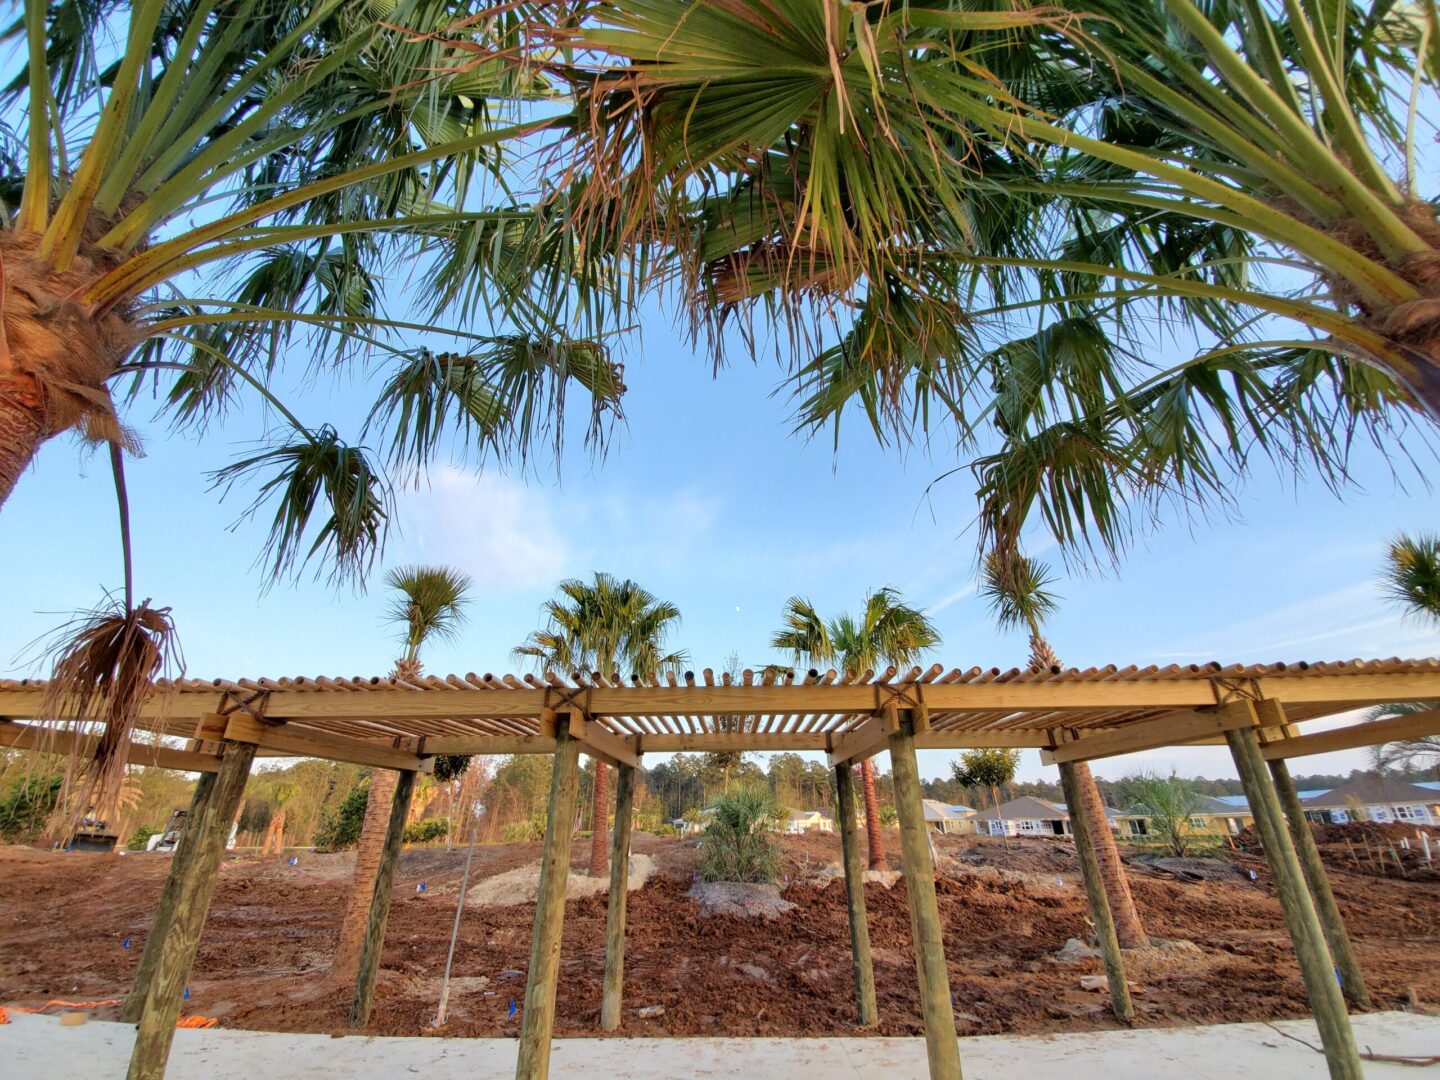 A palm tree in the middle of a construction site.